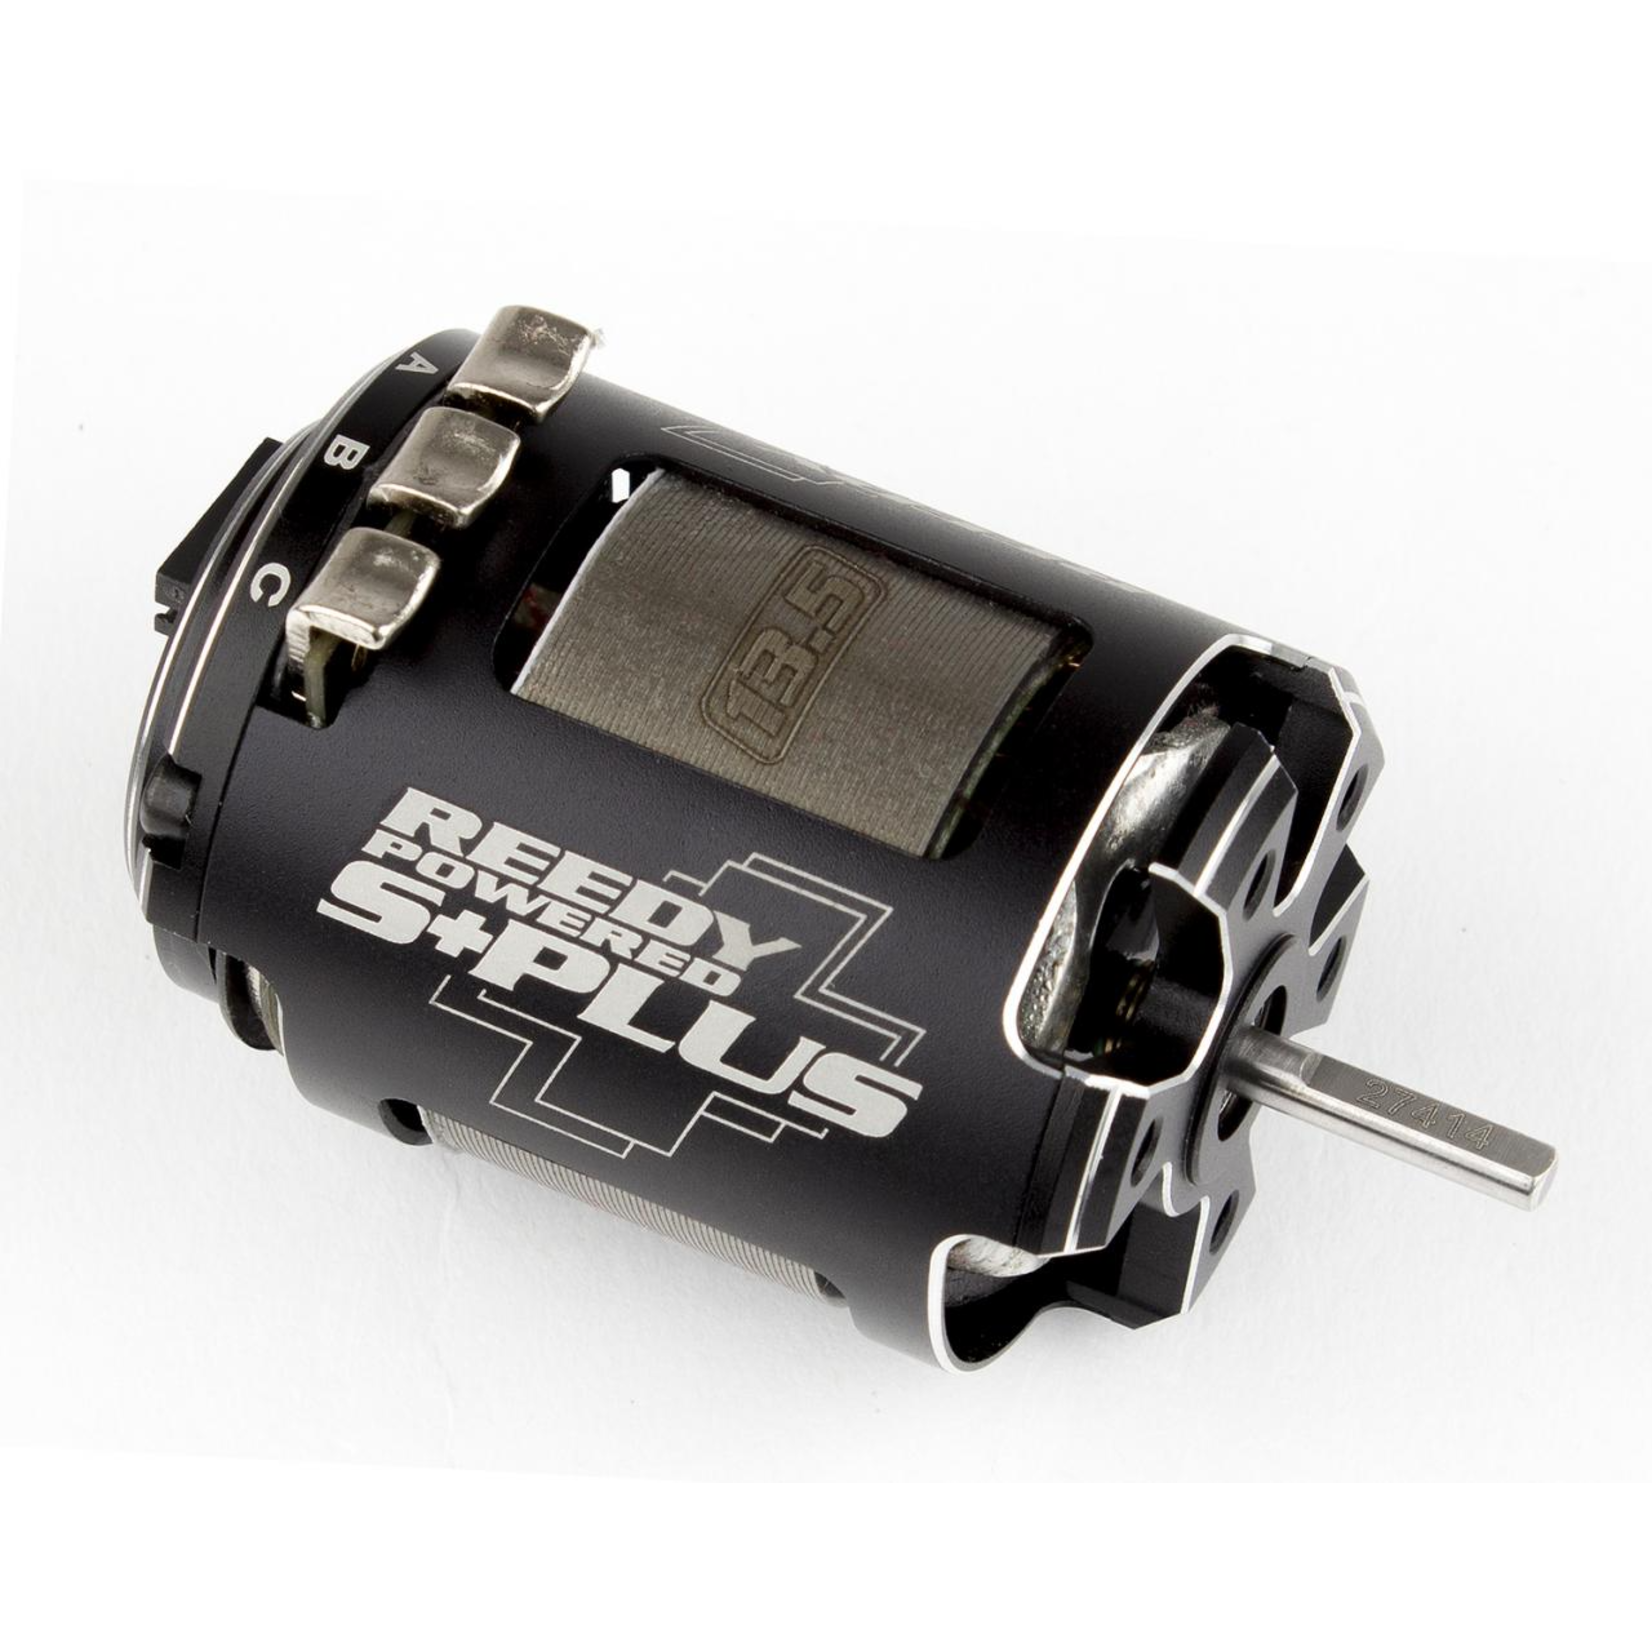 Reedy Reedy S-Plus Competition Spec Brushless Motor (13.5T) #27403